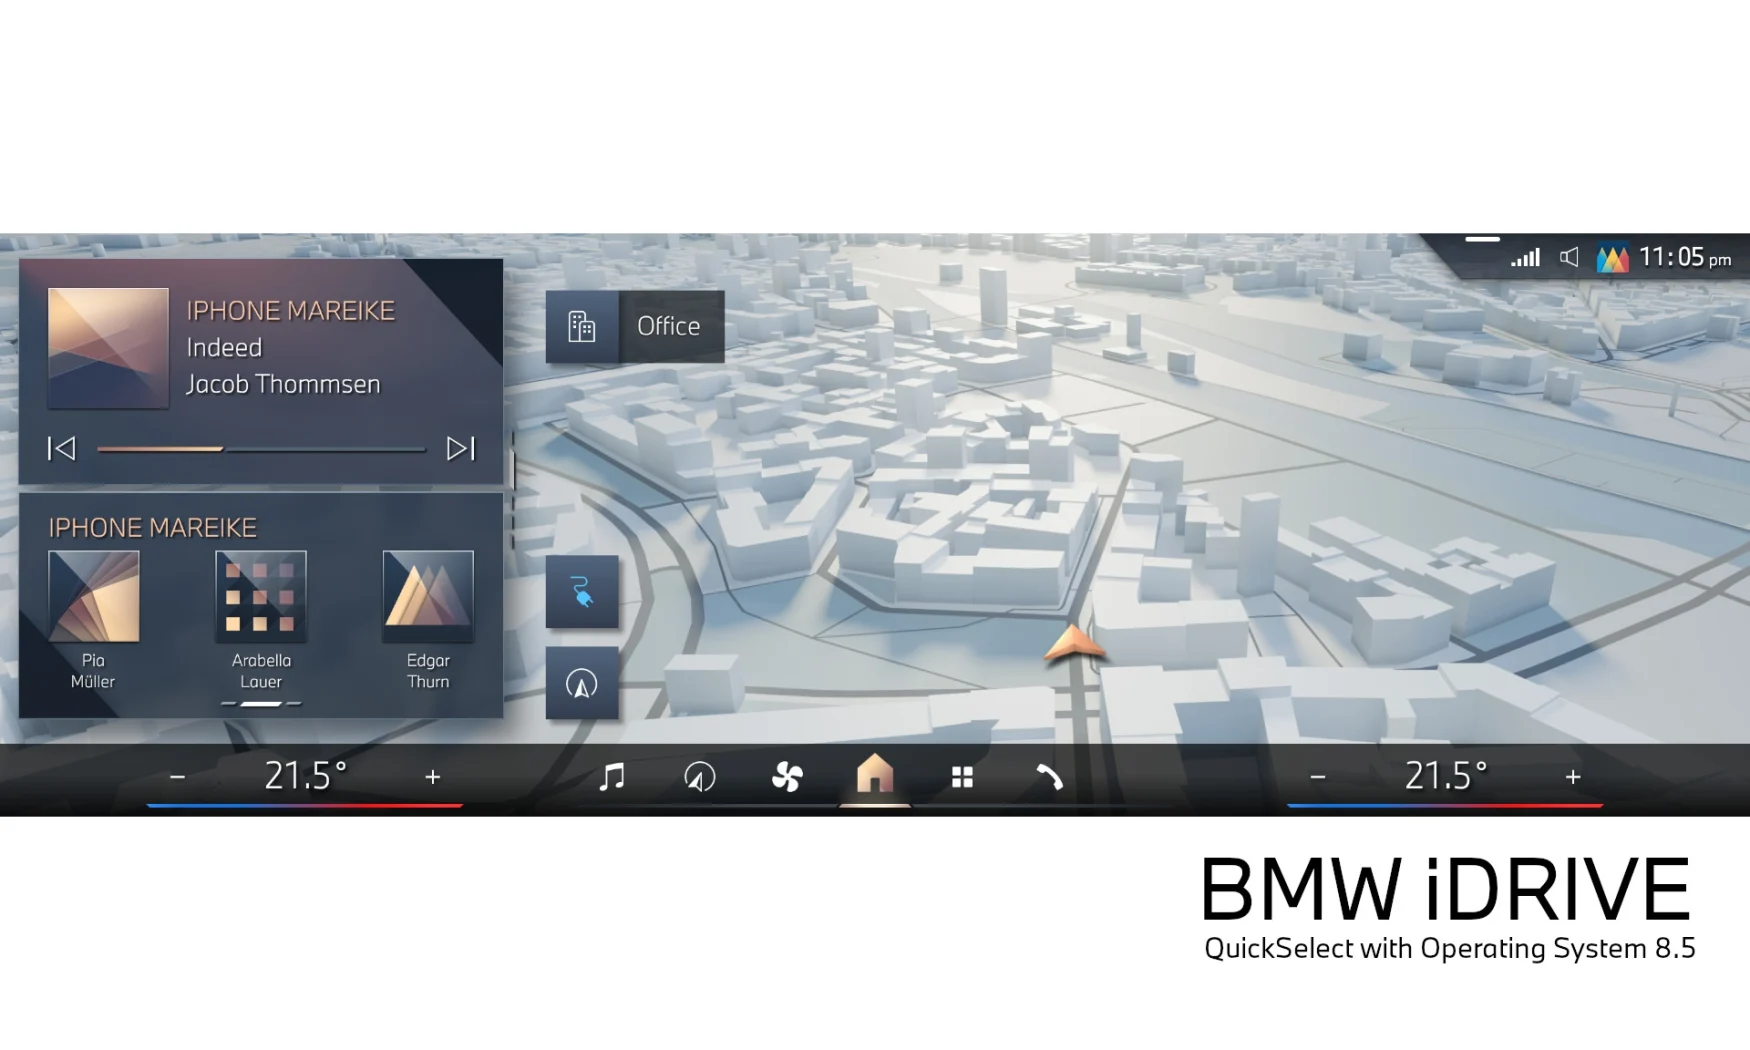 Screenshot of the updated Operating System on the BMW 8.5 infotainment home screen.  On the left, it includes phone controls with navigation on the right and a taskbar (with shortcuts) at the bottom.